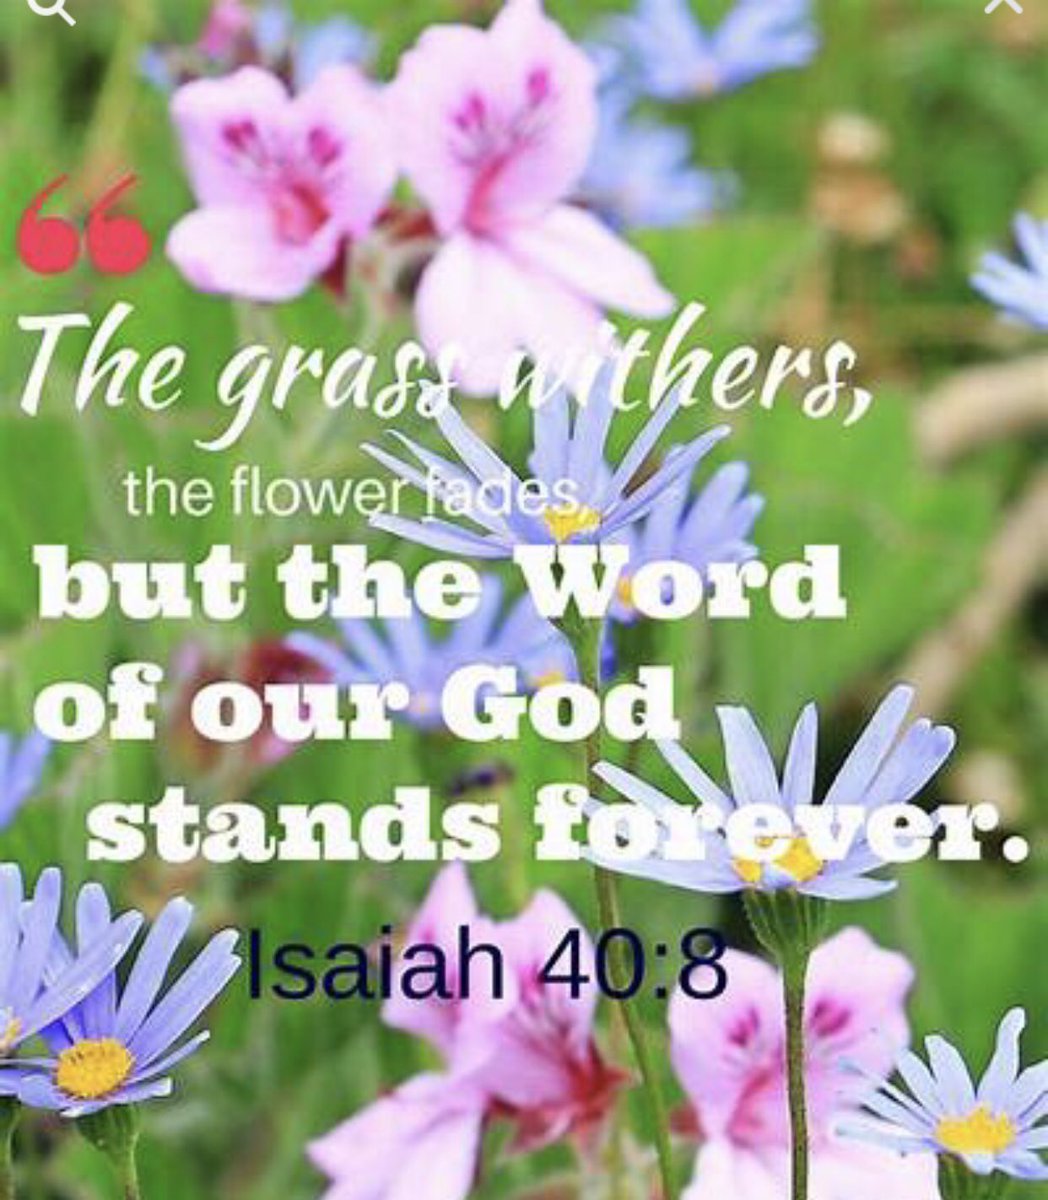 @elliesangelwing @810100jn @intrinsictweets @jamielcantu @LeslieN84904651 @MimiLovesJesus5 @emmanuelobi476 @savebygrace71 @nancy757366841 @MildredOQuin1 @JoeRod94900216 @albert70x7 @KnightlyMike @elviraamberg @BeachcatTt @EllahieCooking @DonataLueck @Stewart7Donna @Ccangelsing @ed_lamon @Angelmom337 @Carole77777 @RoseAmeli1 @beyaself1 @Pgh_Buz @DavidPr70117773 @SkiltonRay @todaypraise8 @IIIDeaton @elosisofficial @DawnLynnMann1 @JaksMimi2 @ChristIsComing4 @great0727 @lyfetreker THEREFORE being, justified by faith, we have peace with God through our LORD JESUS CHRIST; By whom also we have access by faith unto this grace therein we stand, and rejoice in hope of the glory of God. Romans 5:1-2